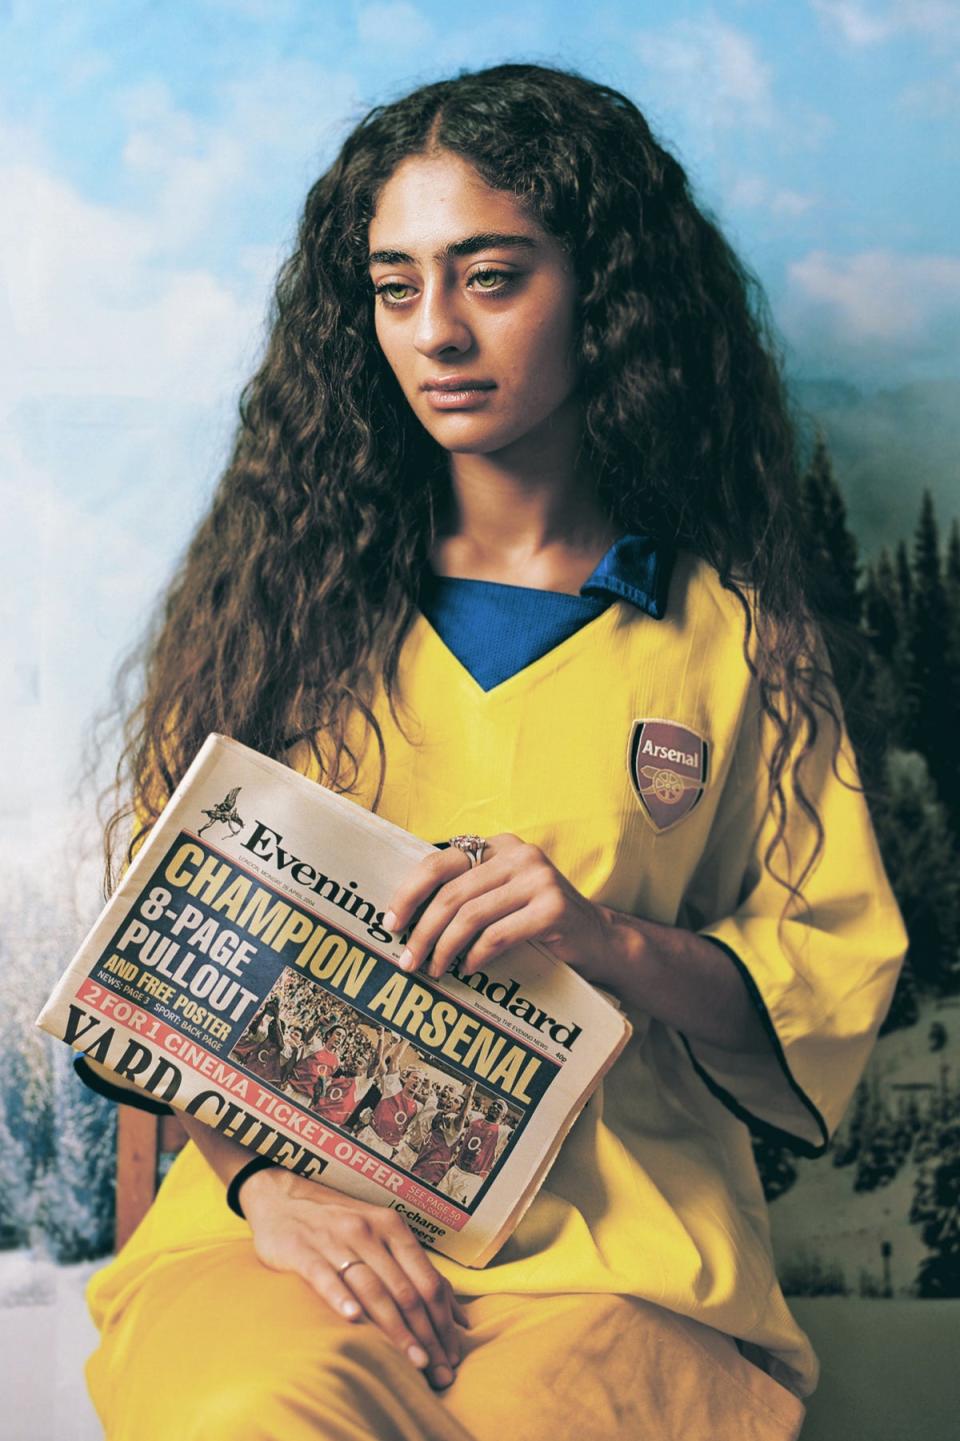 Bever’s latest portrait features a copy of the Evening Standard from 2004, when Arsenal won the Premier League undefeated (Louis Bever)